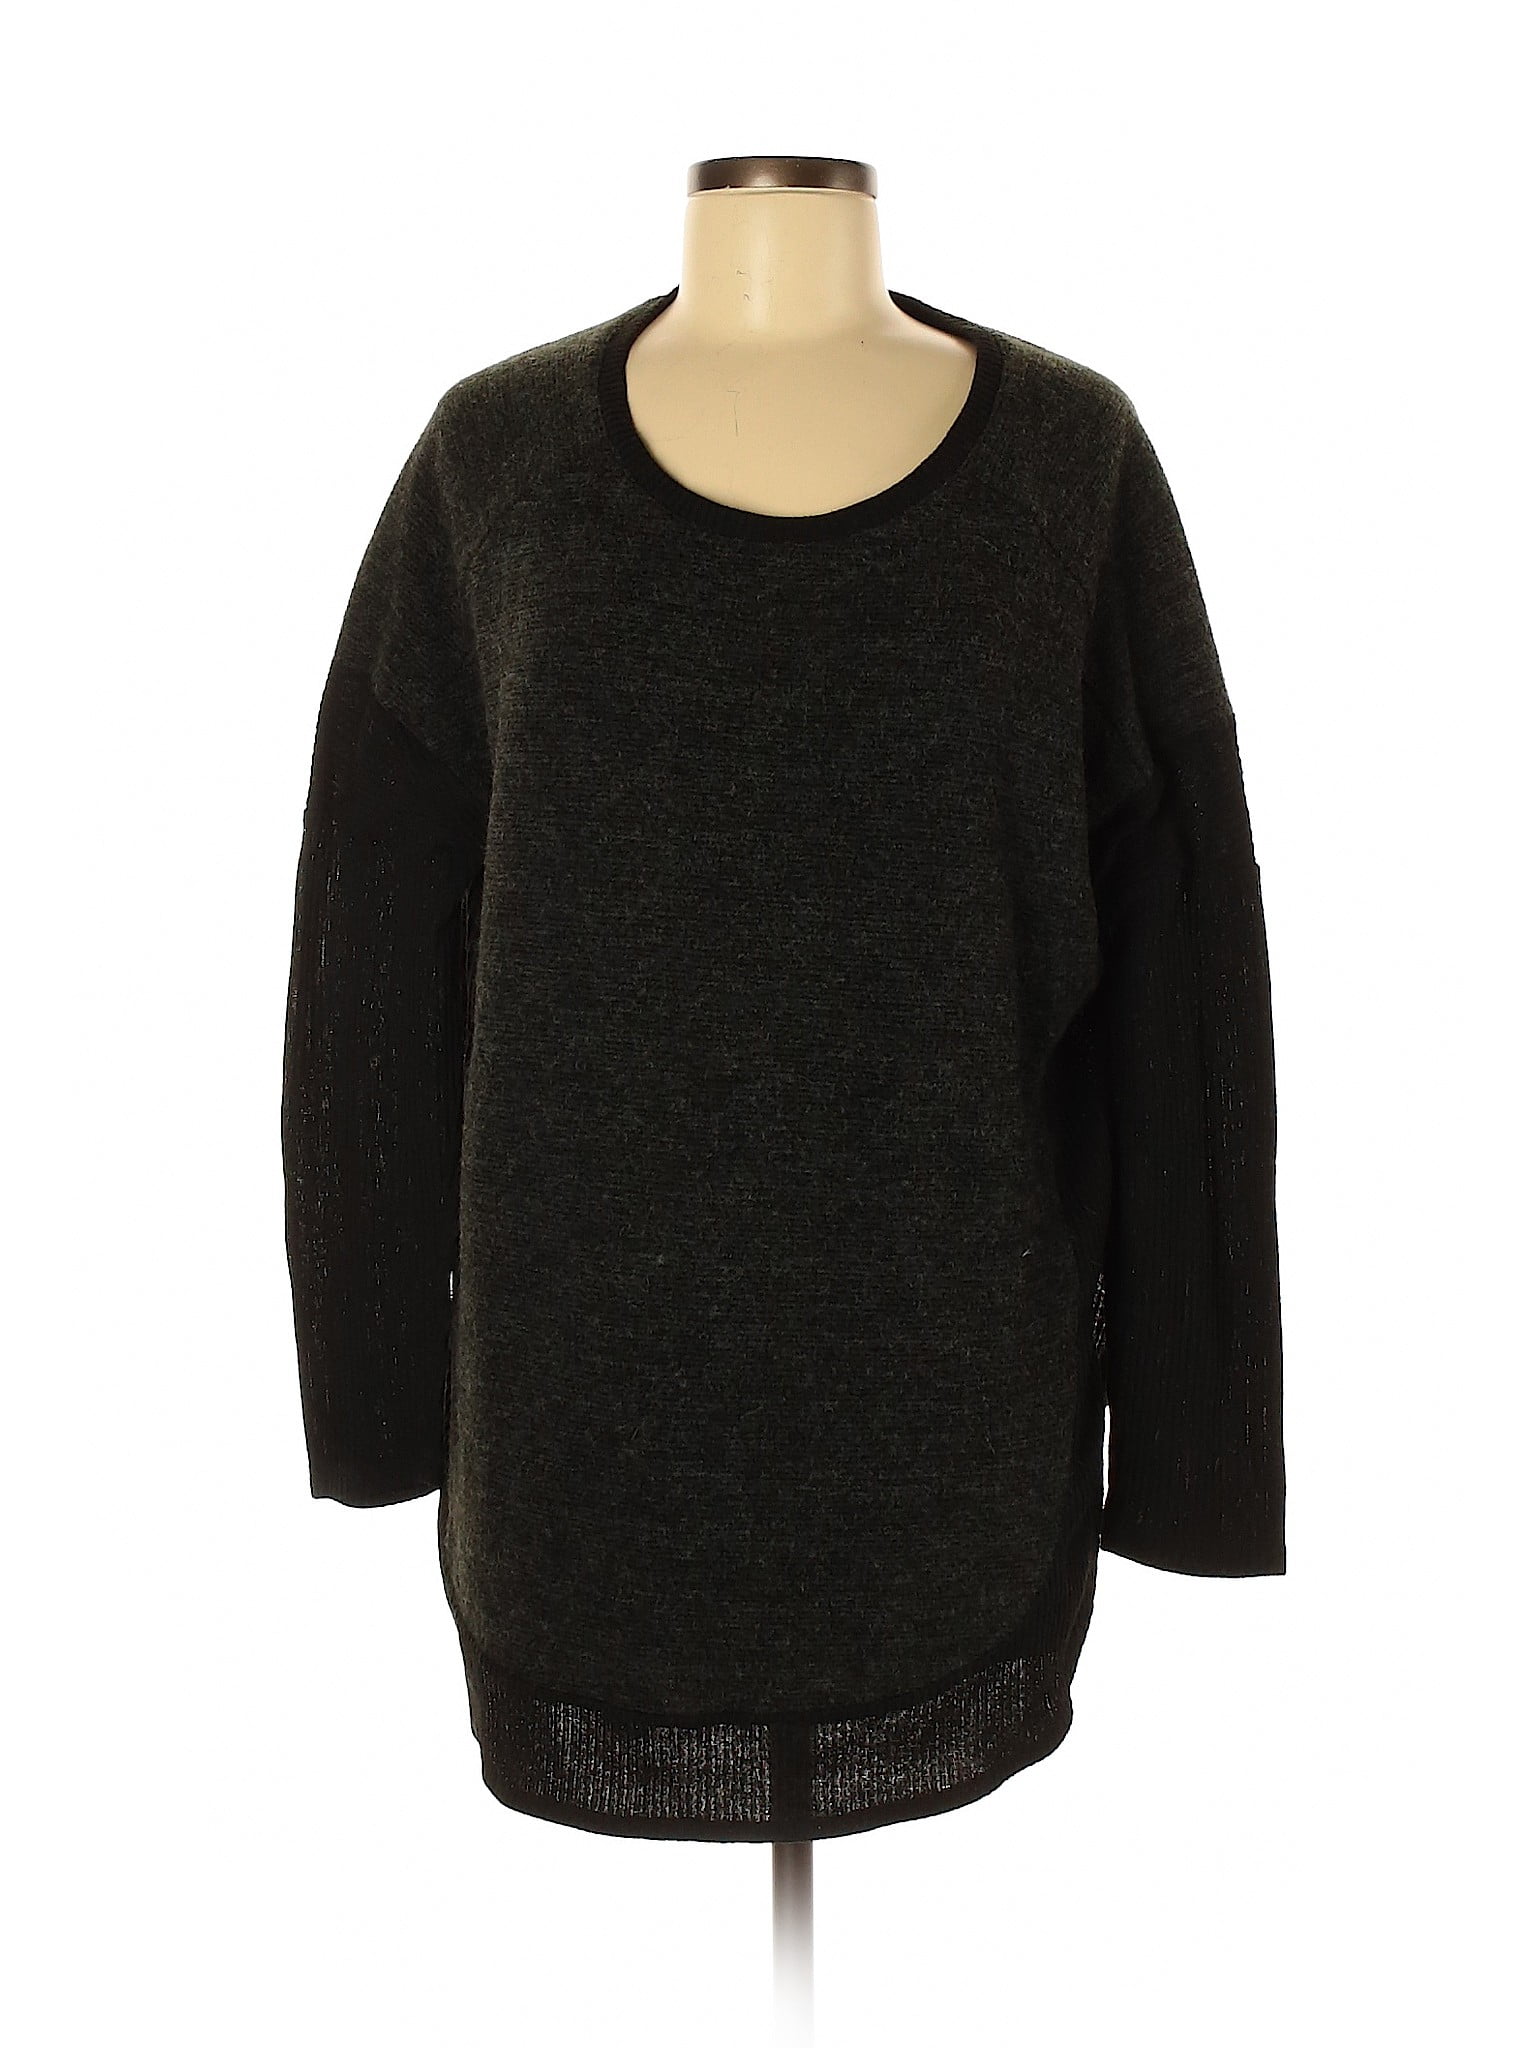 Ann Taylor - Pre-Owned Ann Taylor LOFT Outlet Women's Size M Pullover ...